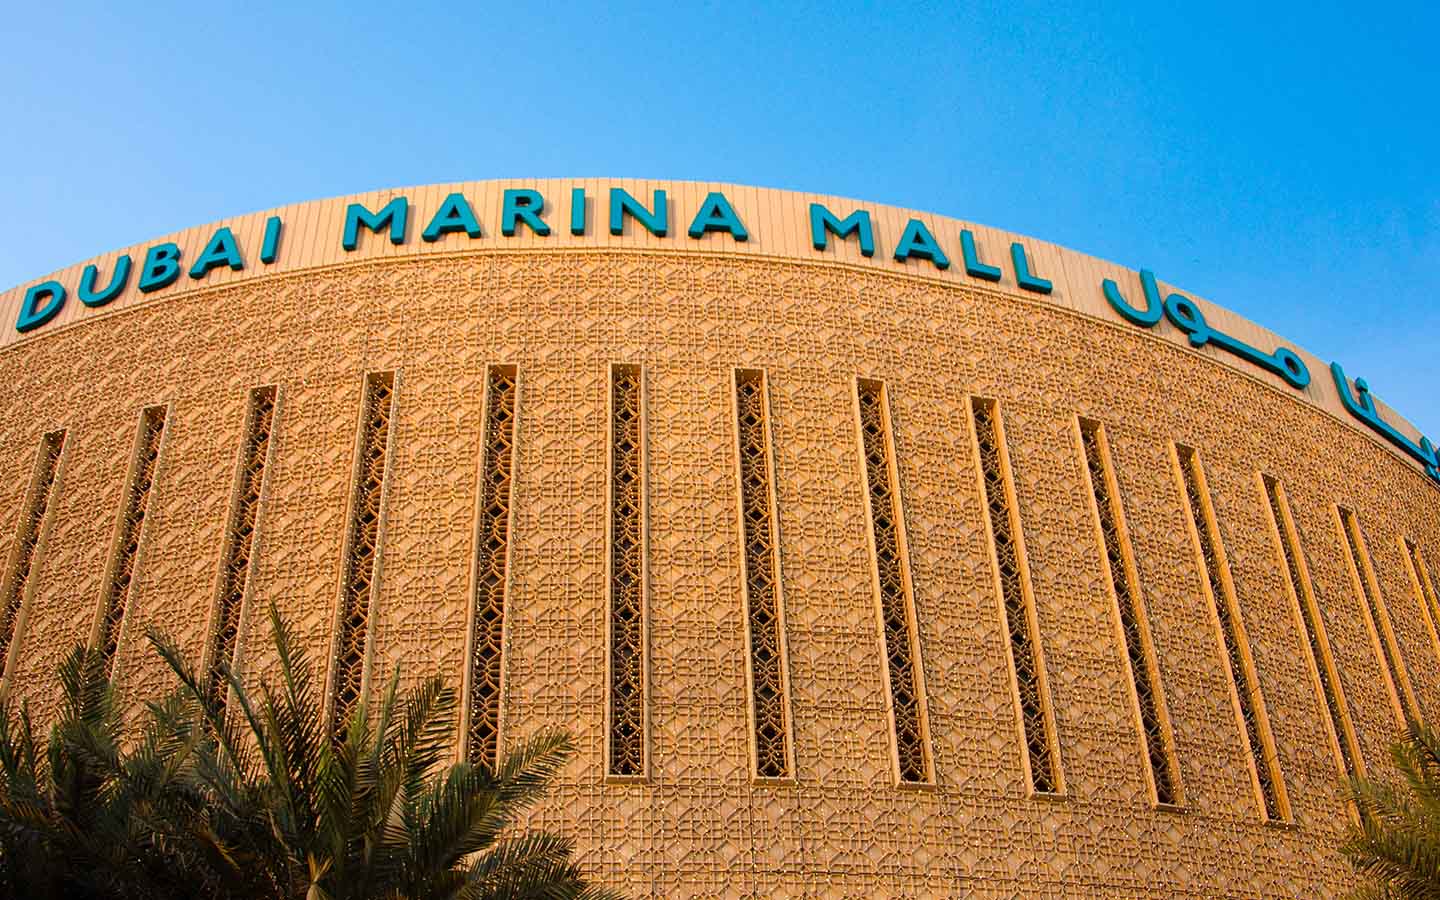 for all shopping needs, residents can visit the dubai marina mall 